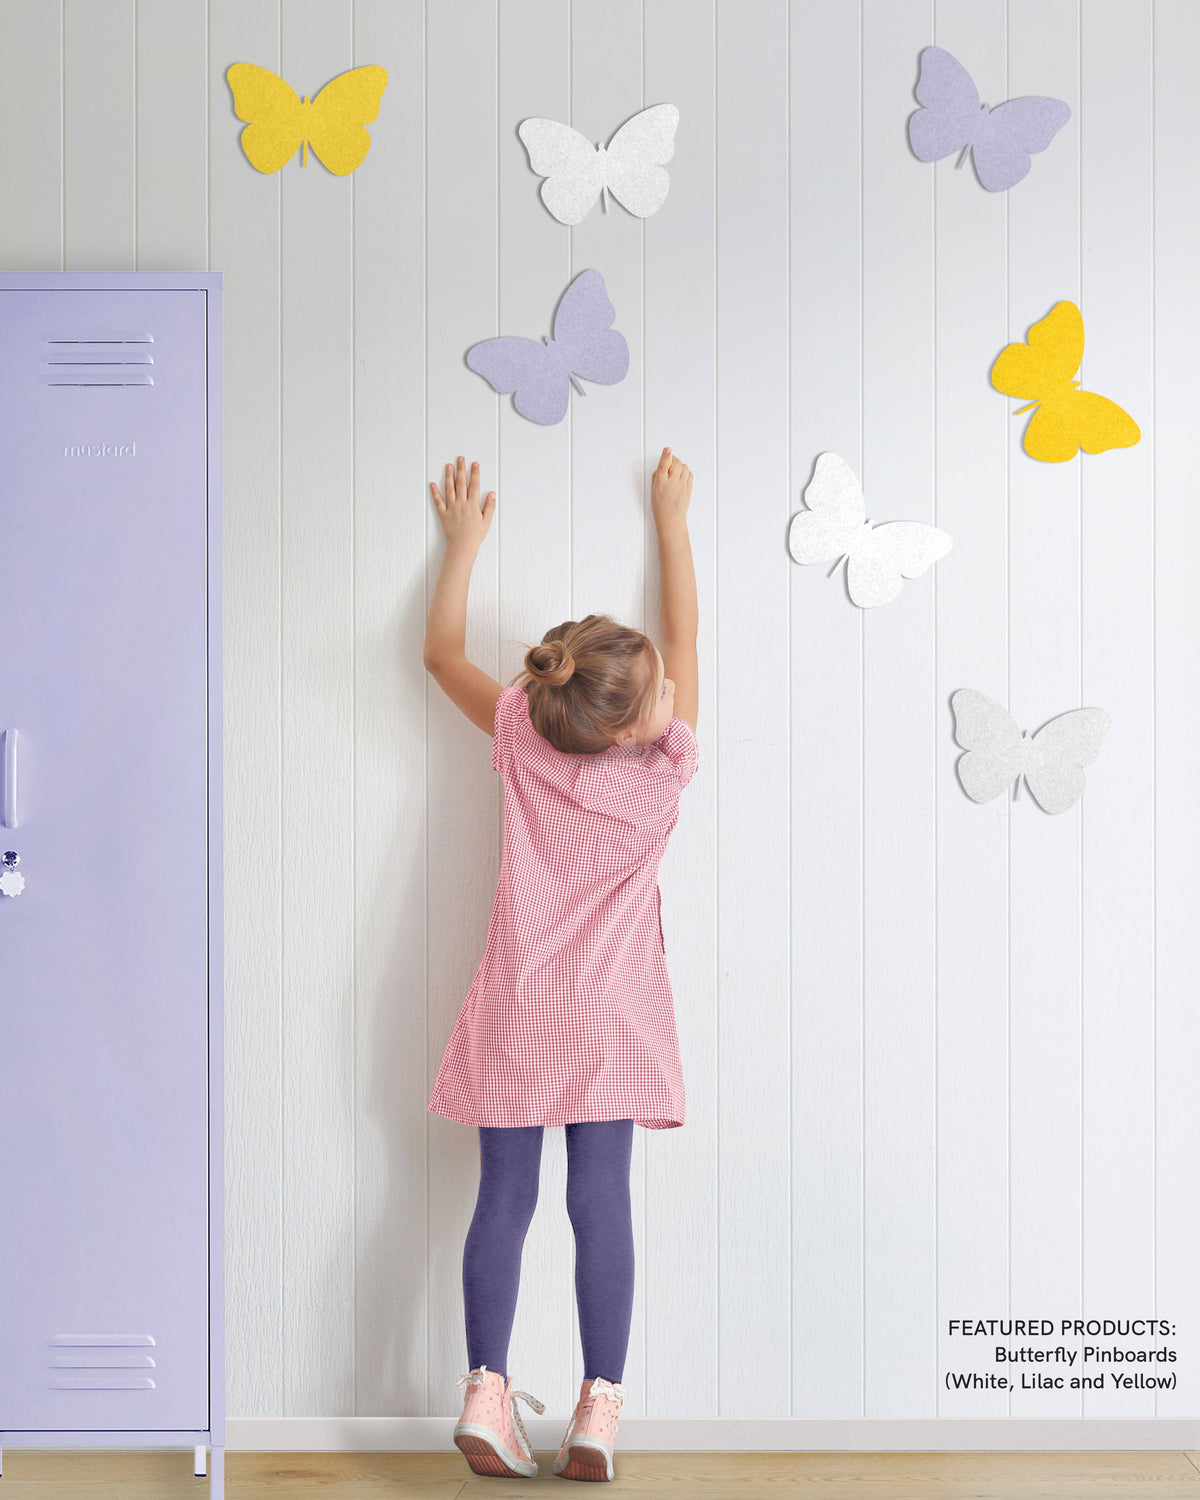 Lilly and Lolly have designed the Mini Butterfly Decor to adorn your kid's walls. Our fluttering Butterfly Wall Decors have a beautiful felt-like appearance, and are amazing to touch as well as visually appealing in kids bedrooms and playrooms. They come with easy peel and stick tabs for your wall.